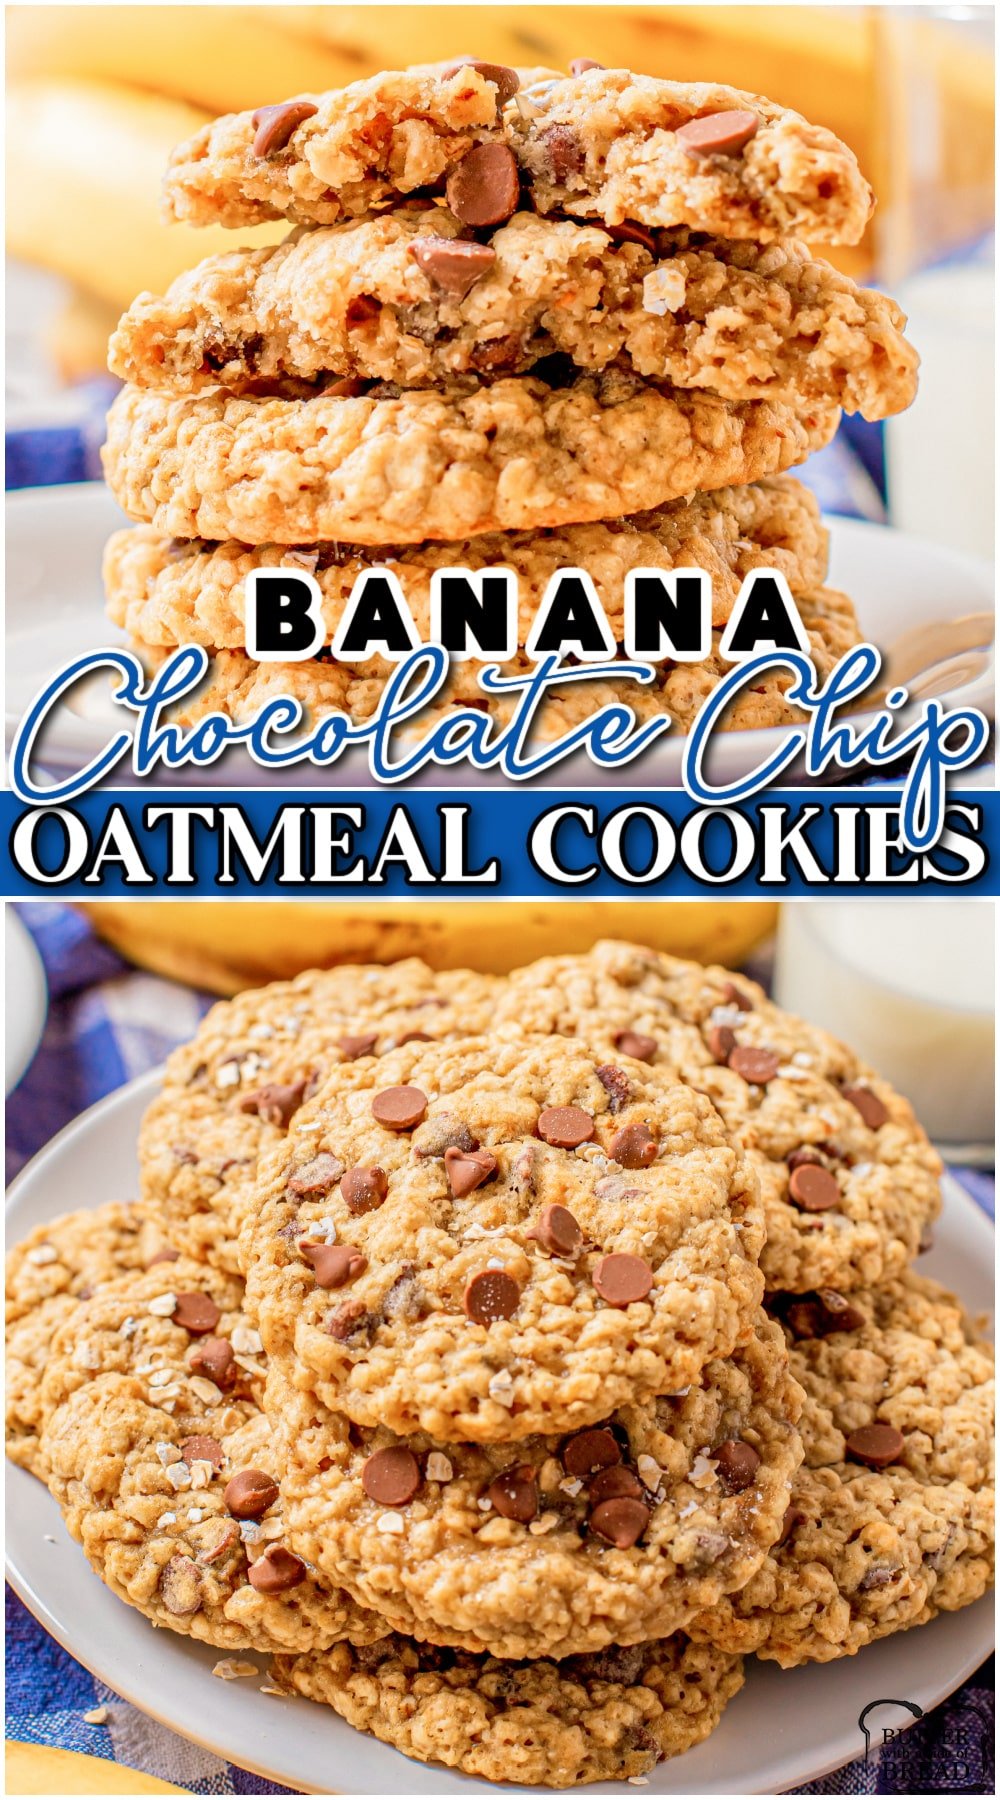 Chocolate Chip Banana Oatmeal Cookies made with ripe bananas, old-fashioned oats & chocolate chips for a loaded breakfast cookie everyone enjoys!